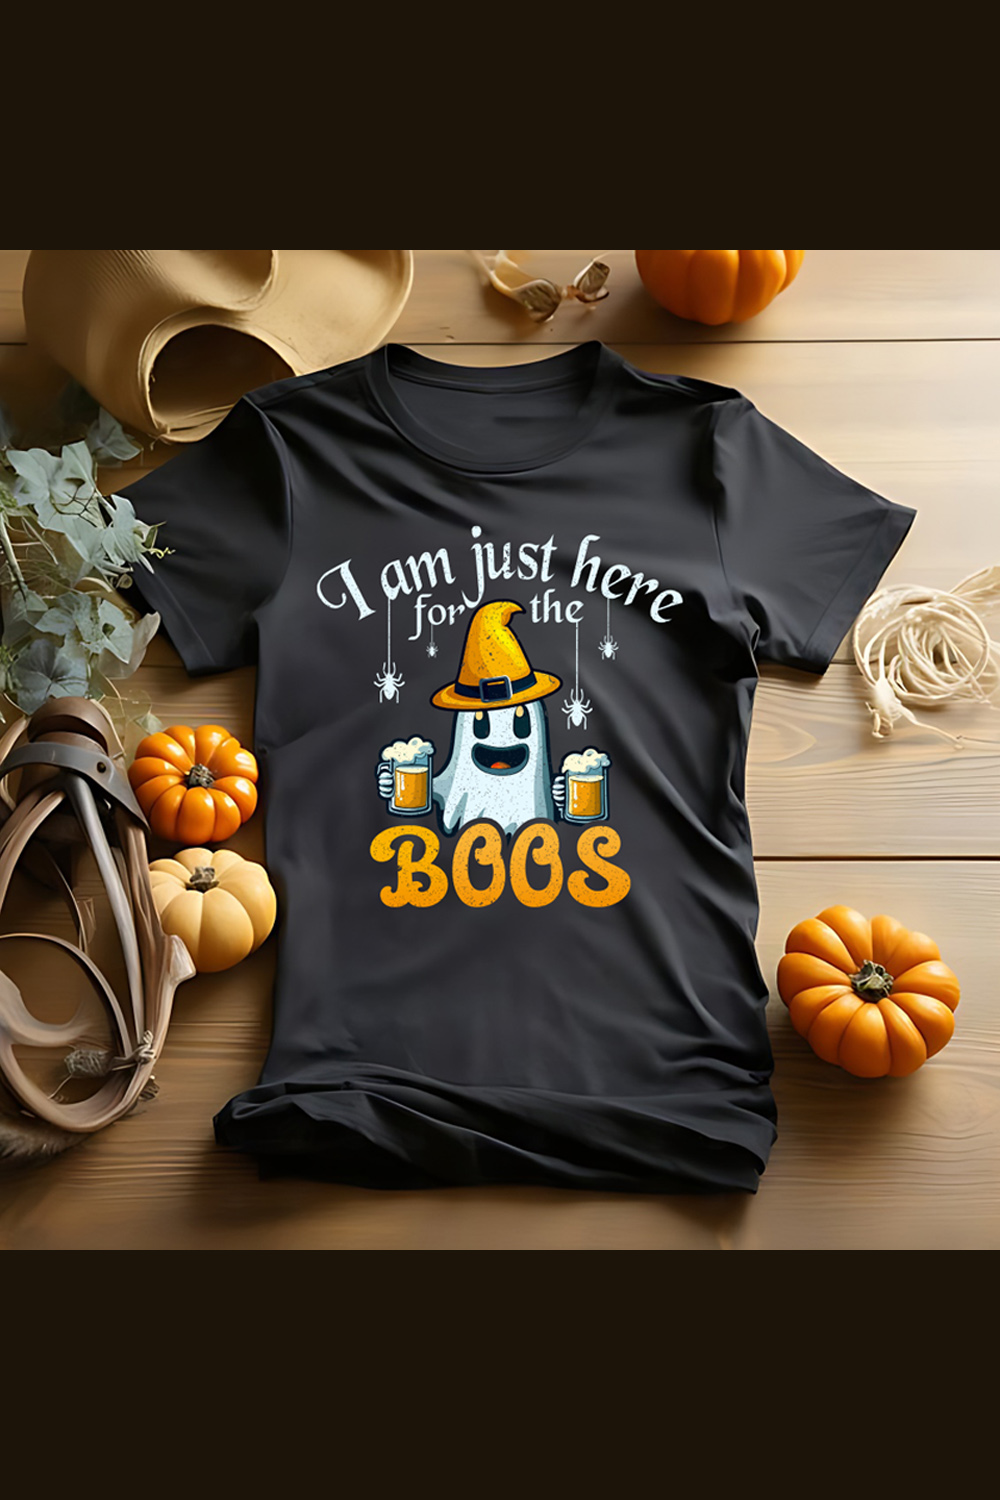 I’m here just here for the boos halloween t-shirt design pinterest preview image.